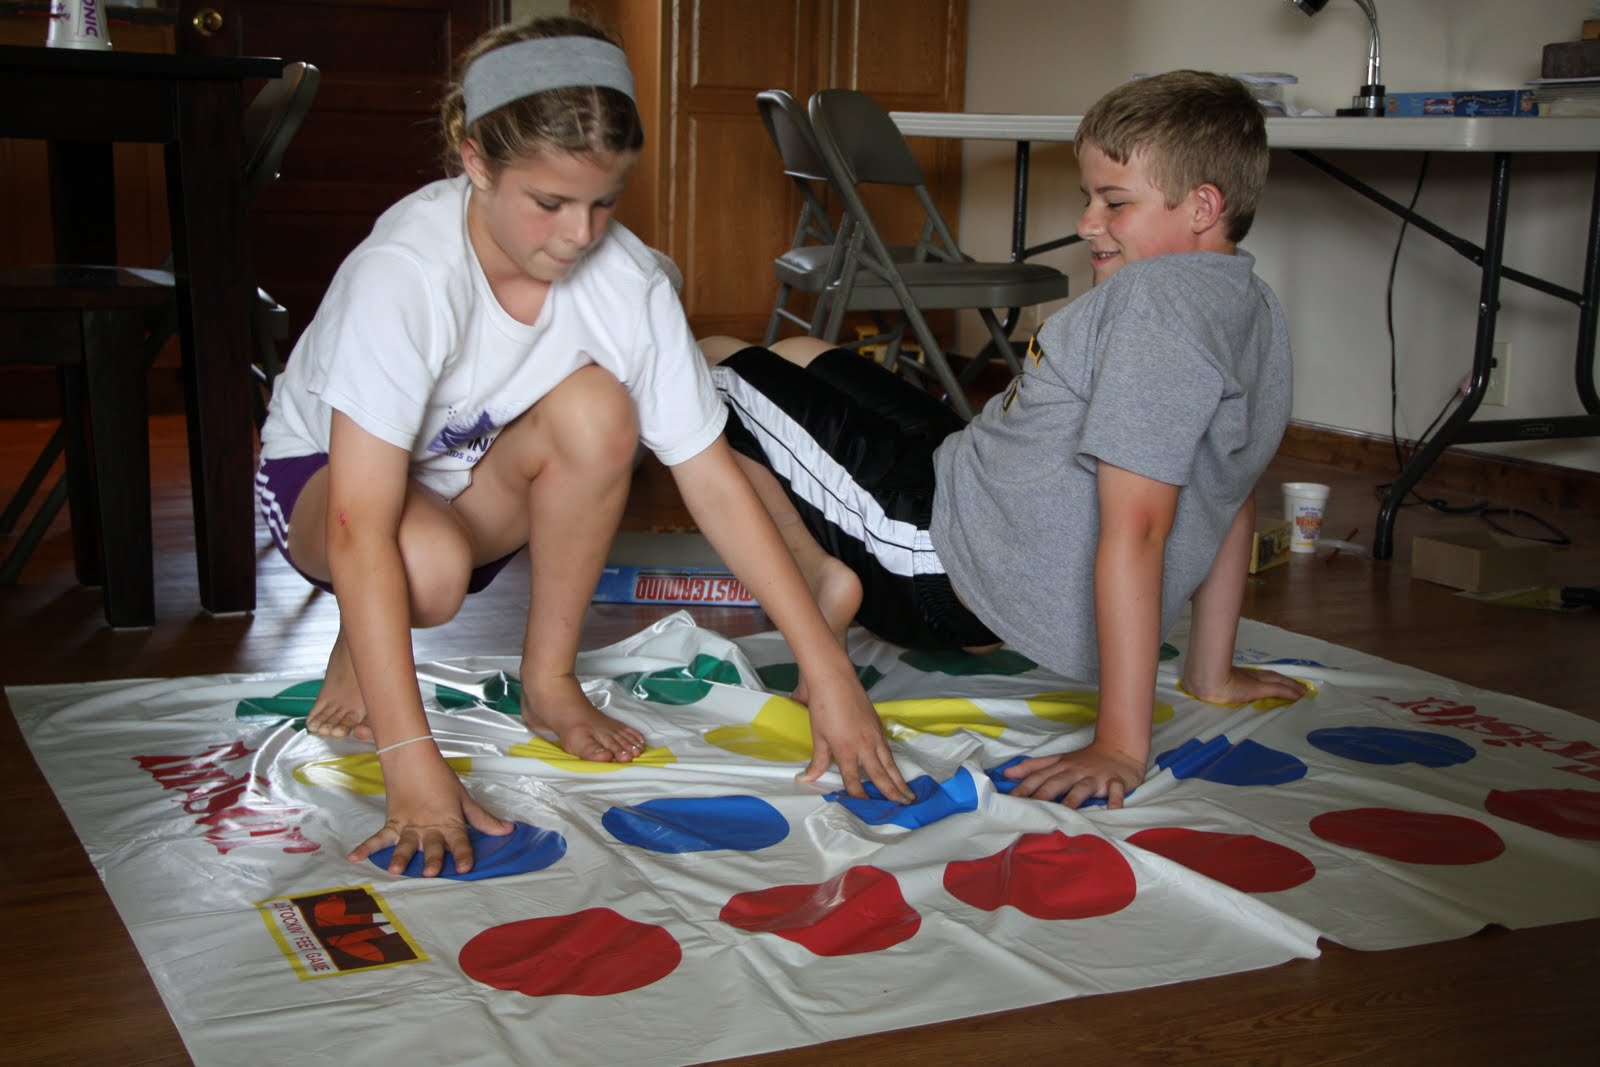 fun with the twister game